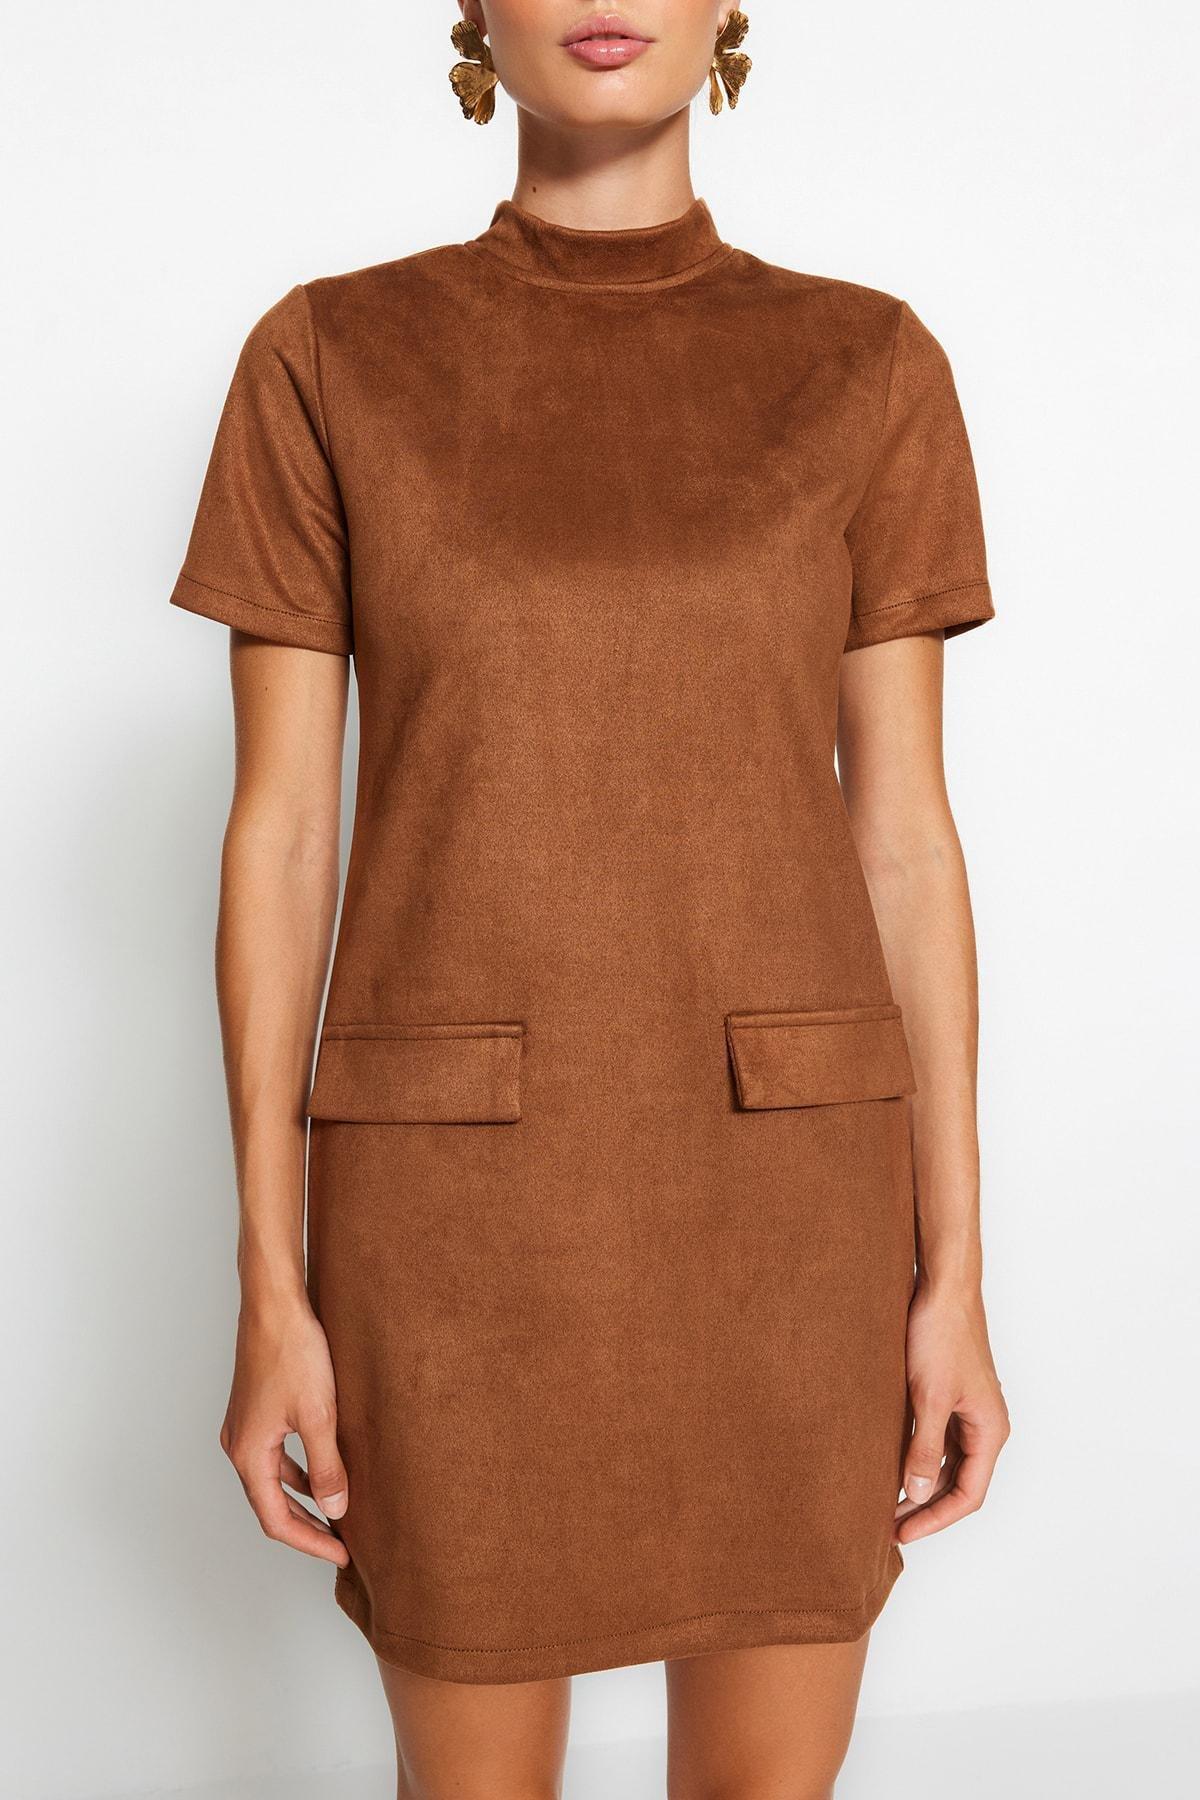 Trendyol - Brown Collared Suede Knitted Dress